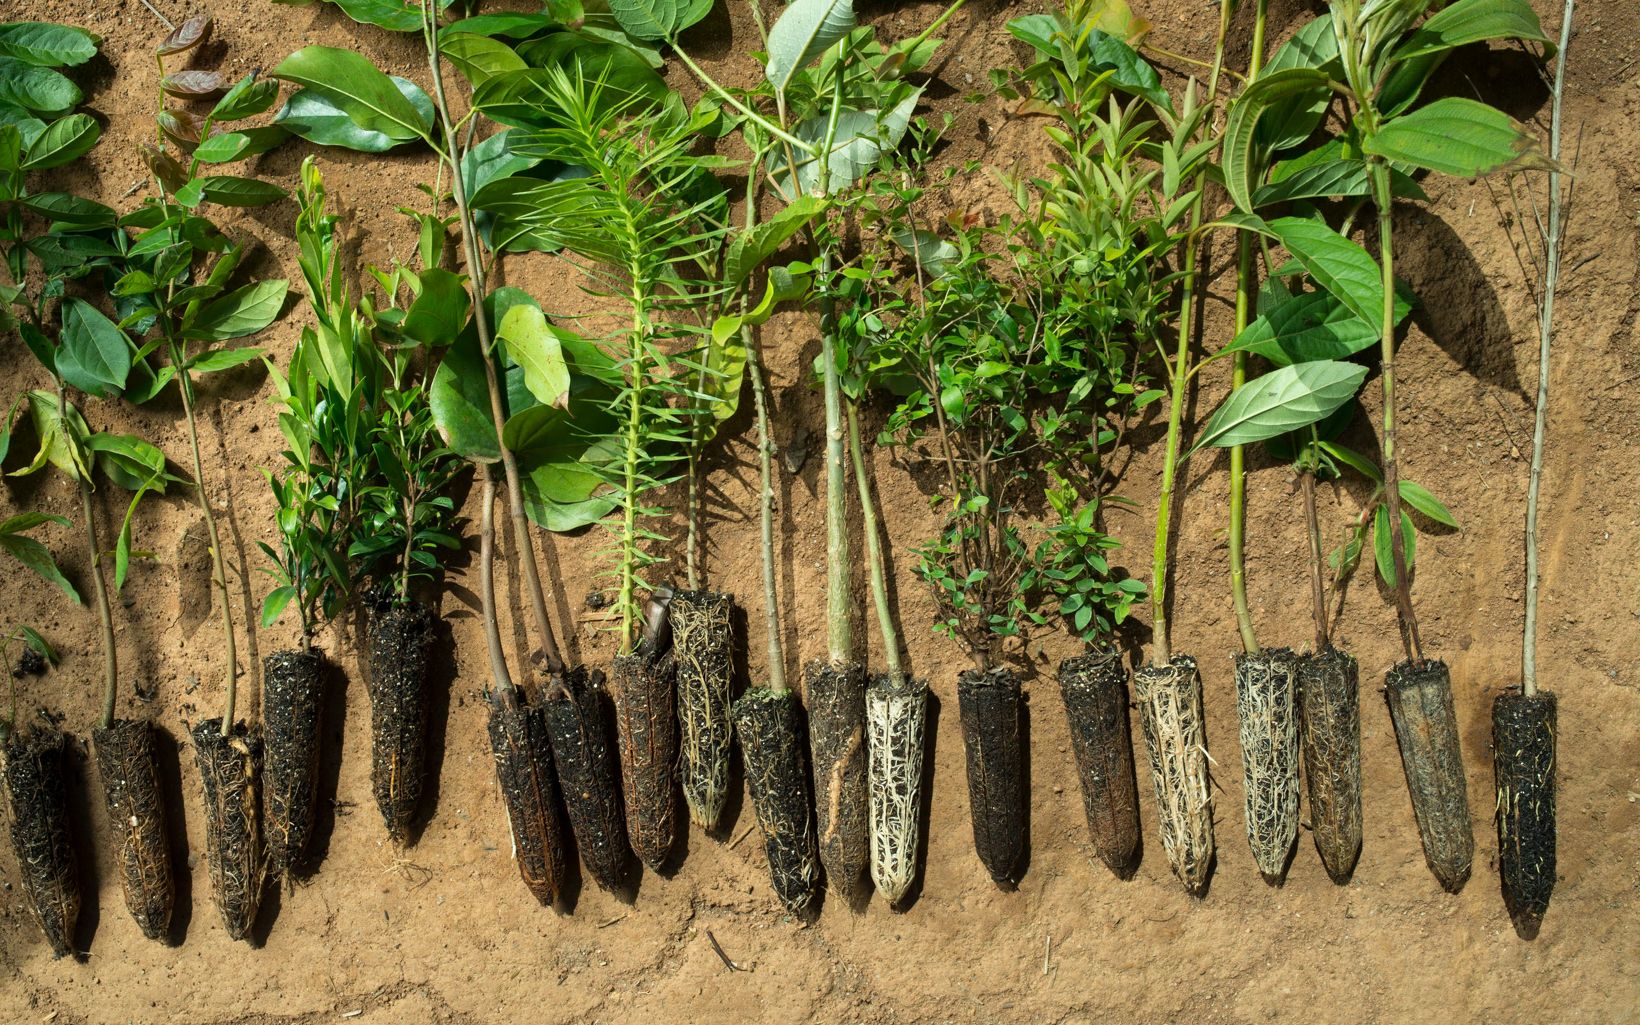 Atlantic Forest of Brazil: These trees are prepared to be planted in the Mantiqueria area of the Atlantic Forest of Brazil as part of TNC's climate change program. © Robert Clark